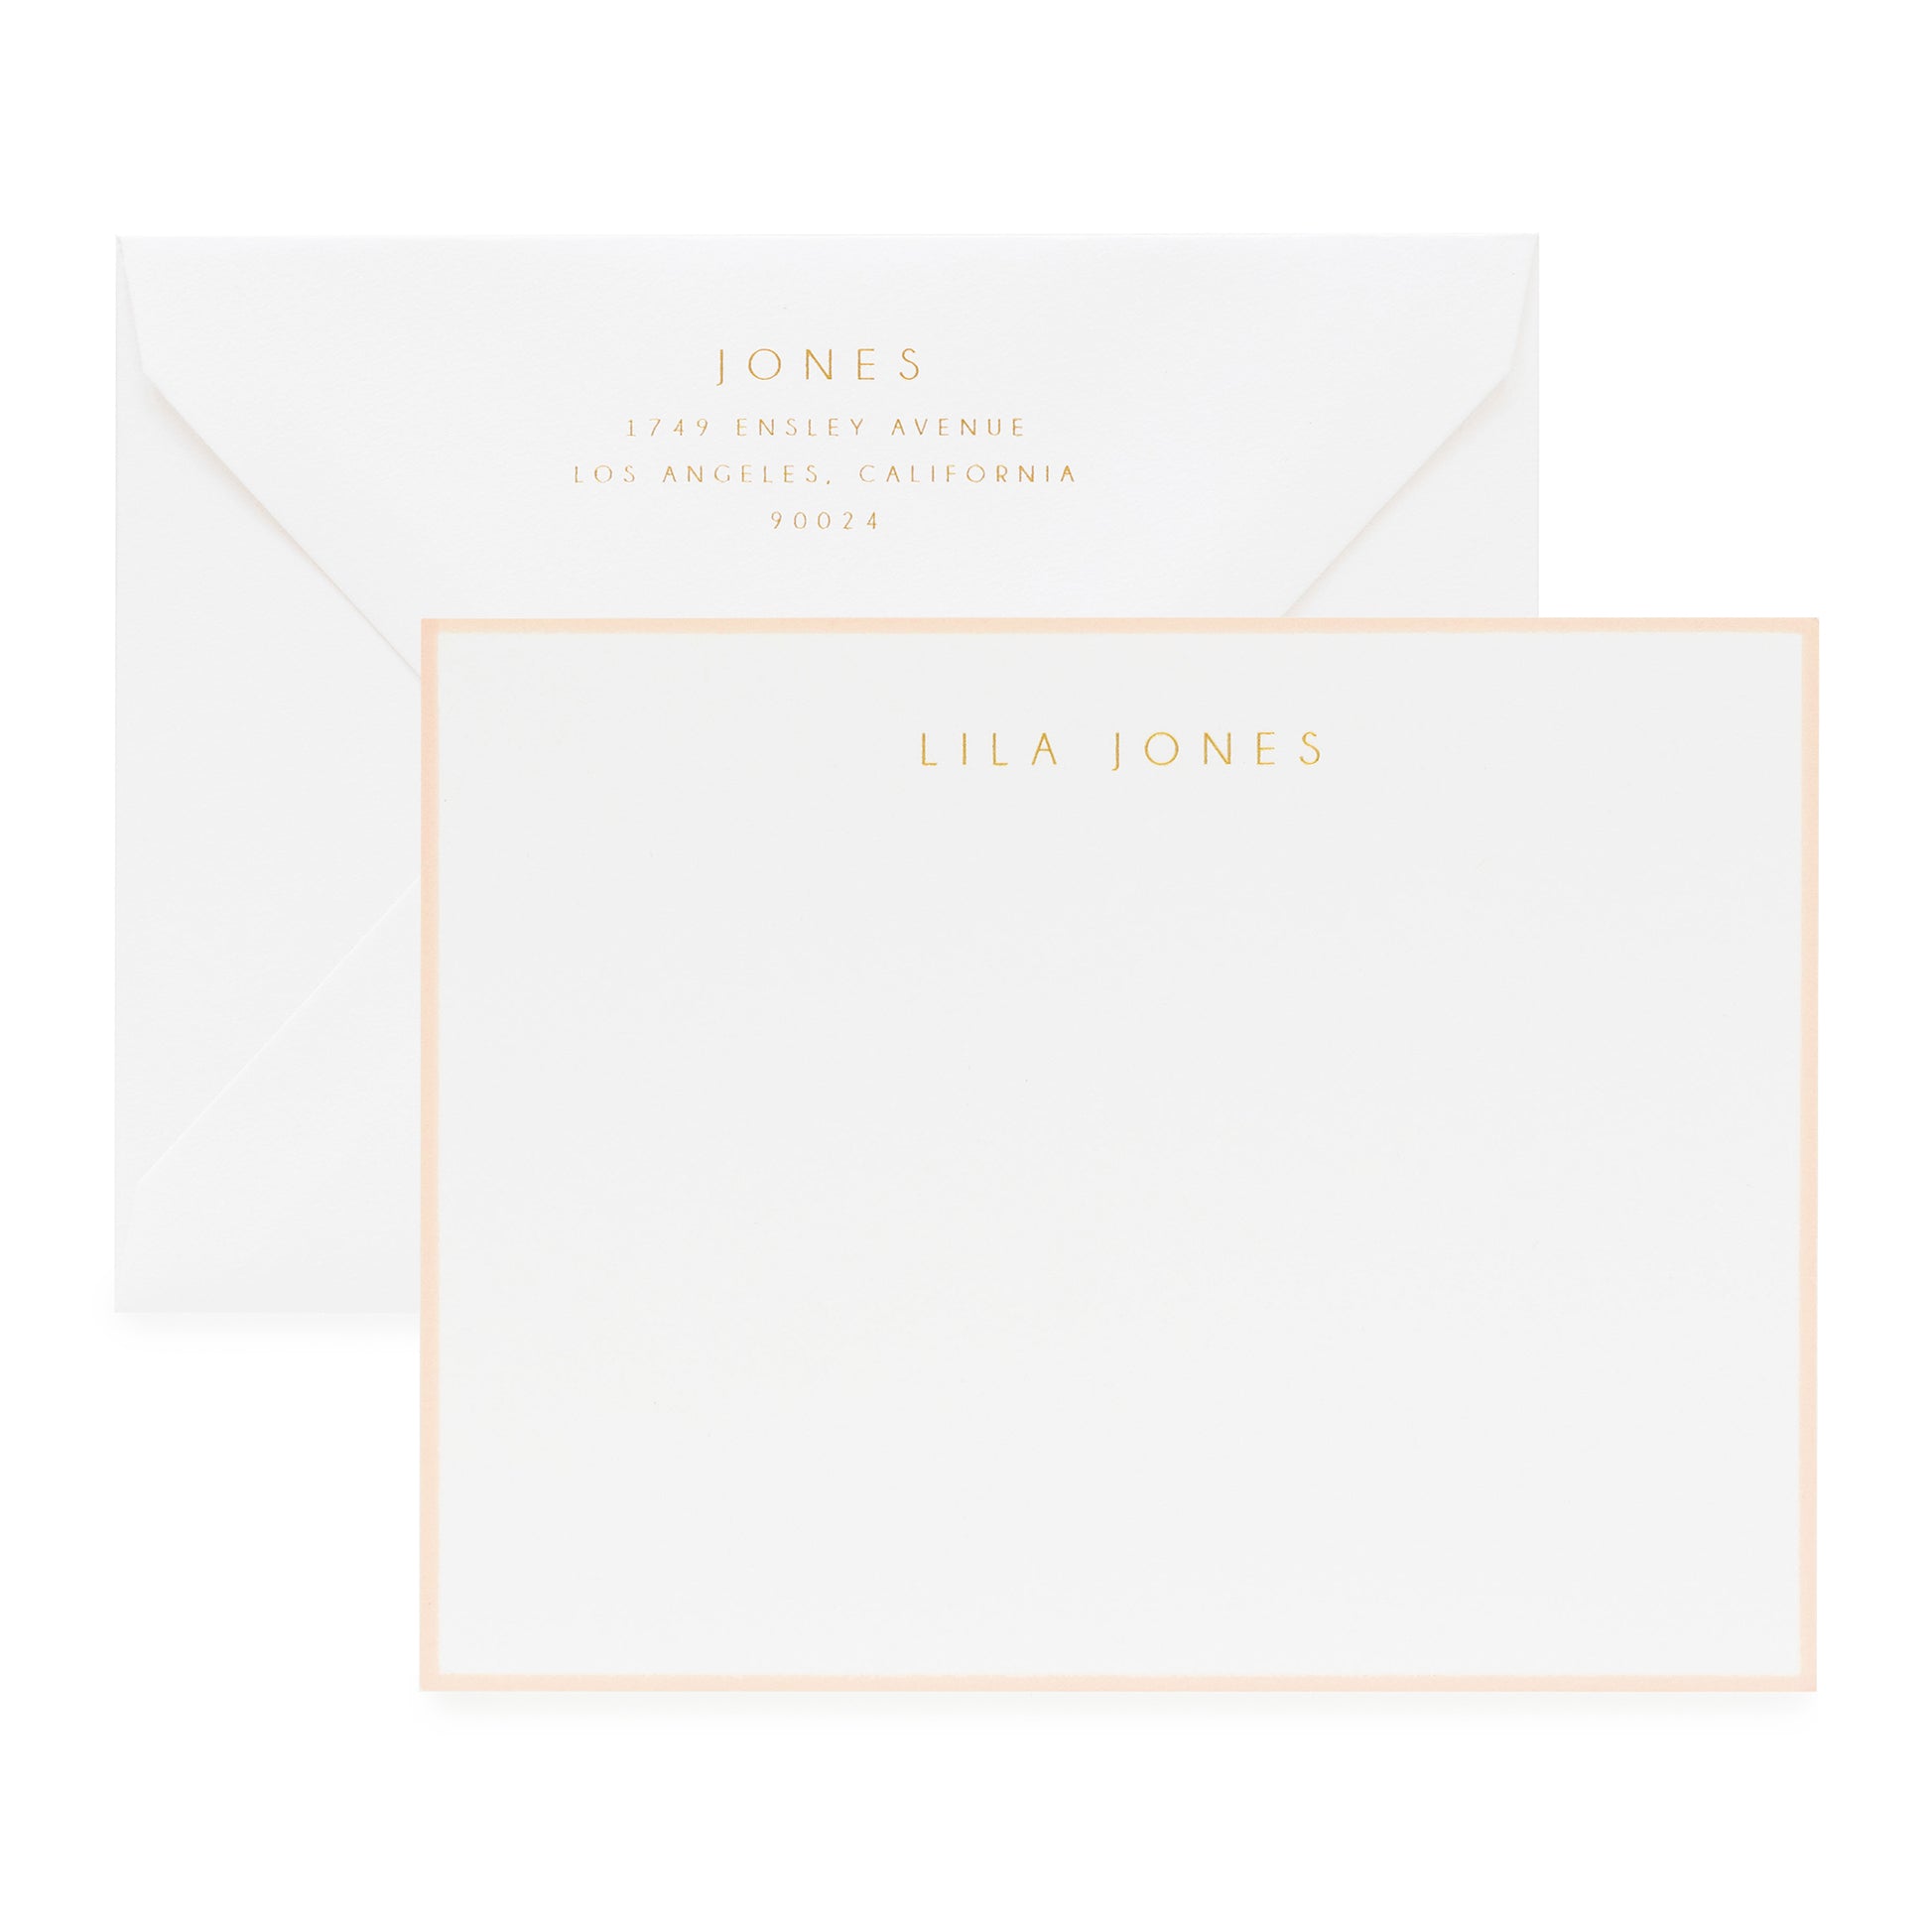 Pale pink and gold on white custom stationery